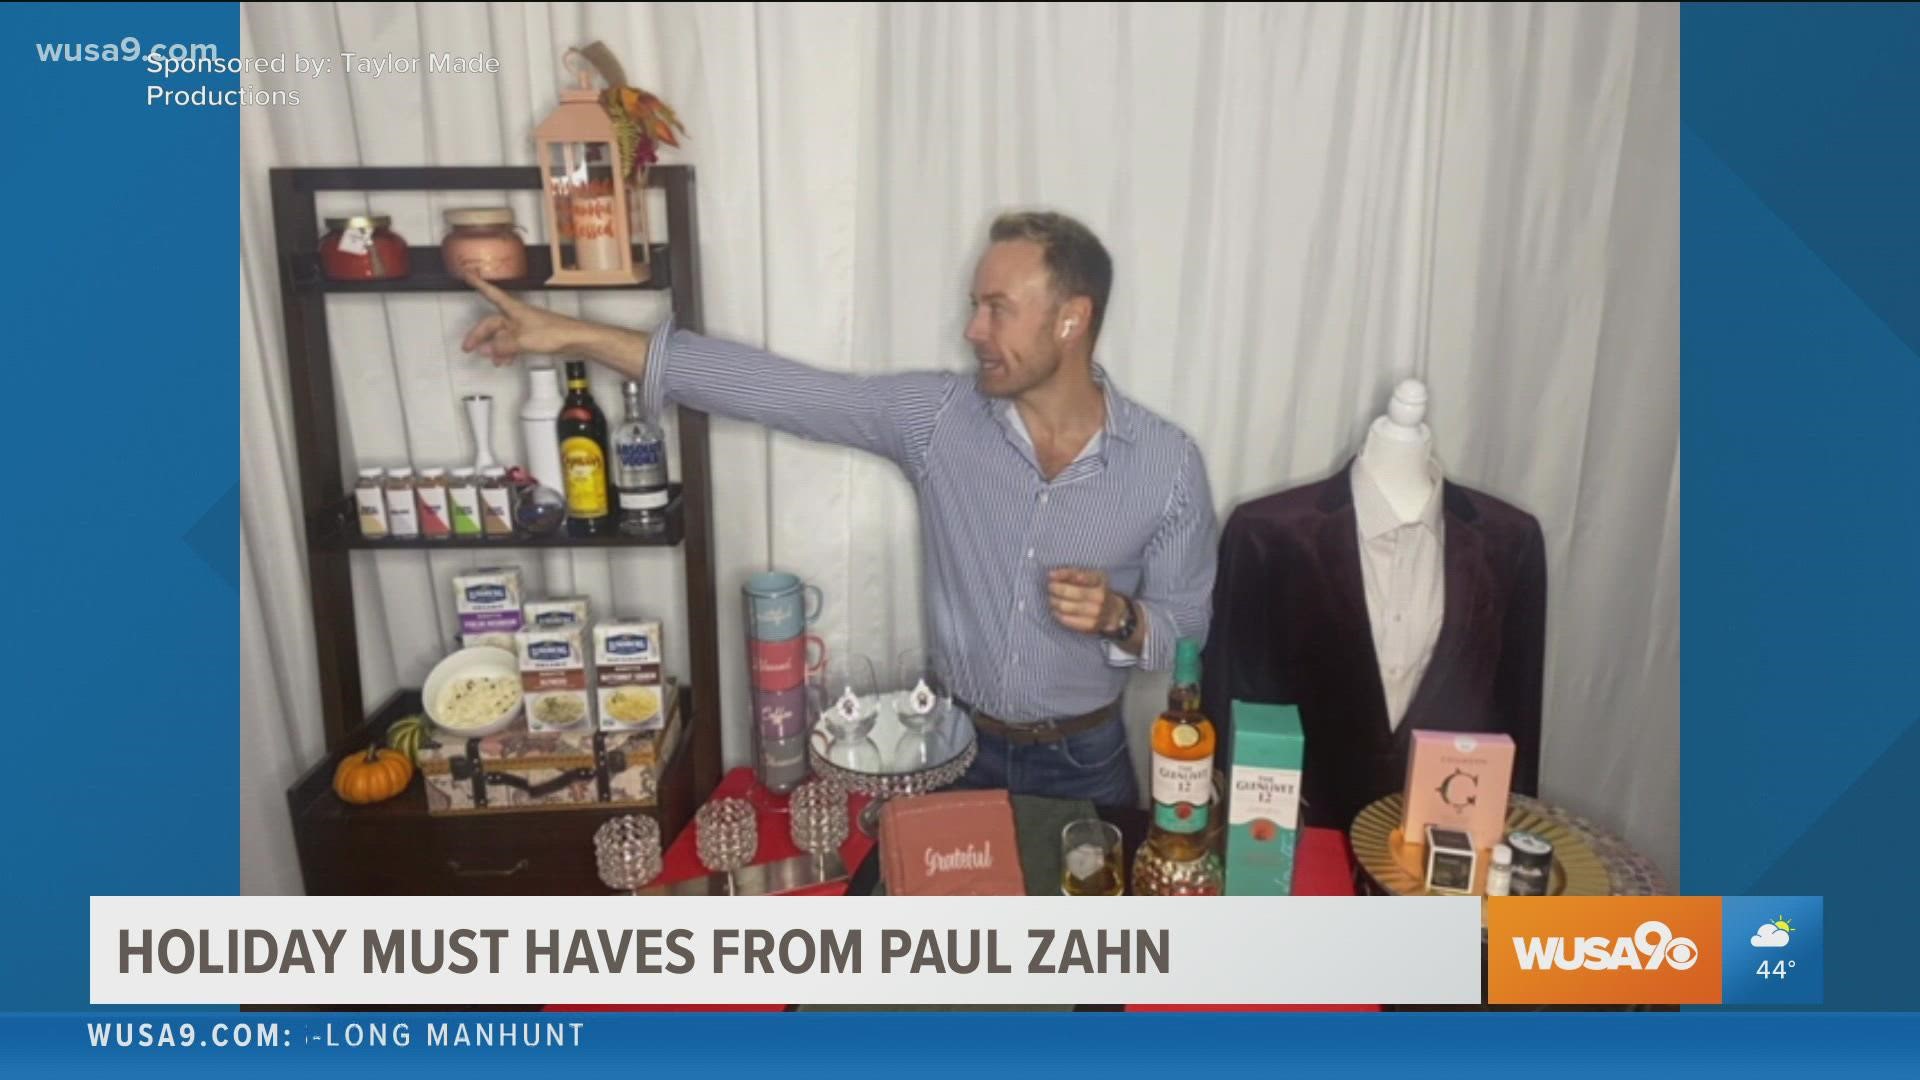 Entertaining expert Paul Zahn has some tips to help you get started on a holiday season full of fun and joy. Sponsored by Taylor Made Productions.